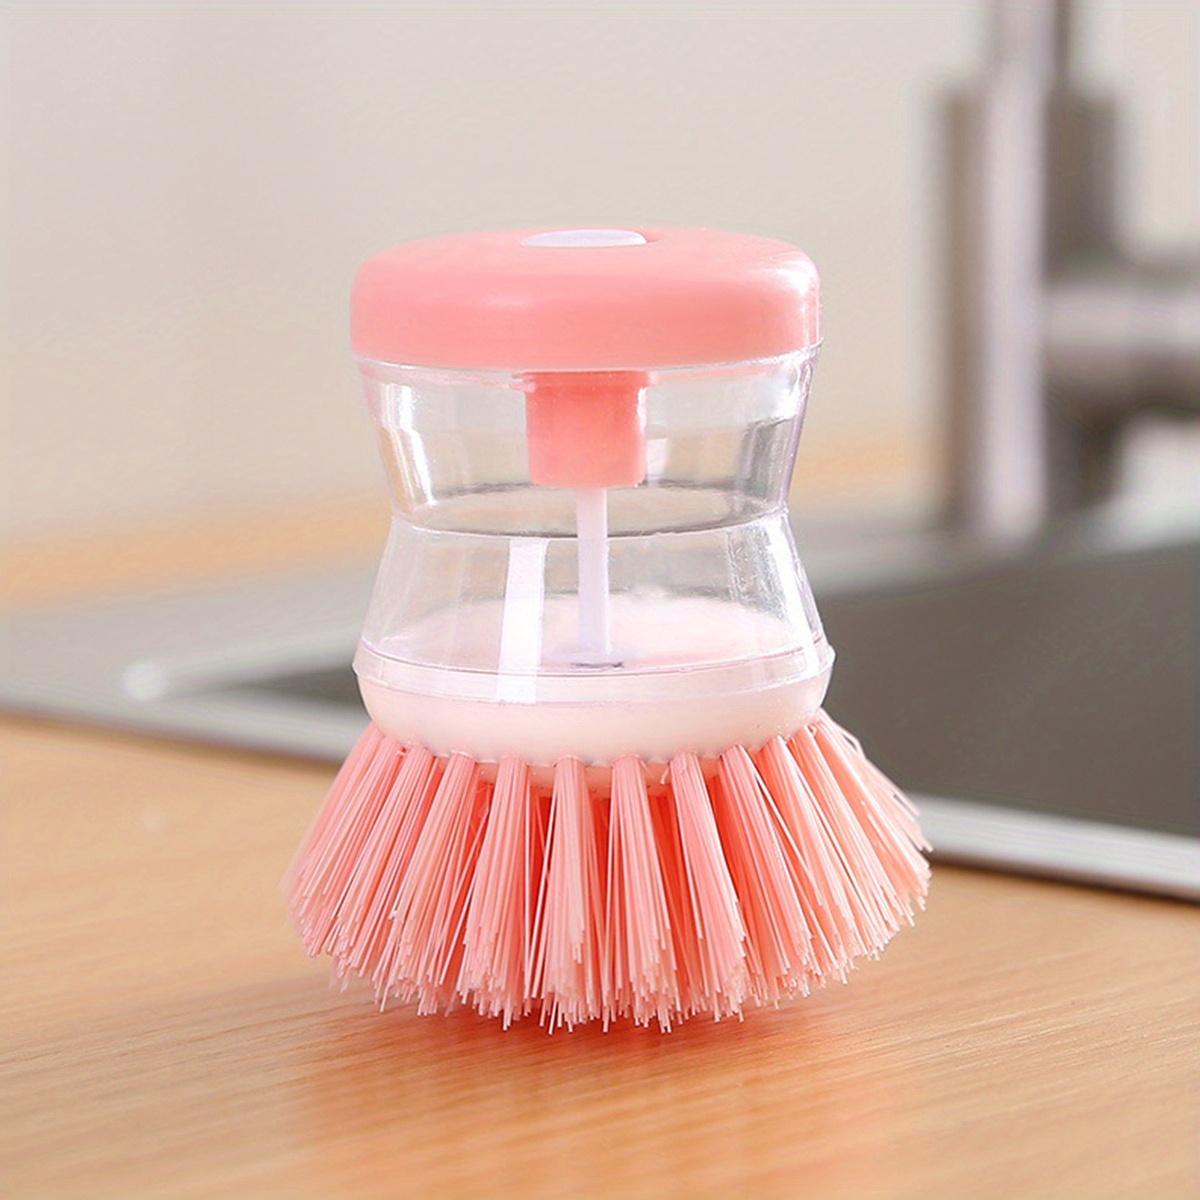 Dish Brush with Soap Dispenser 3 Brush Replacement Heads Set Dish Scrubber with Silicone Handle Kitchen Dish Scrub Brush for Cleaning Dishes